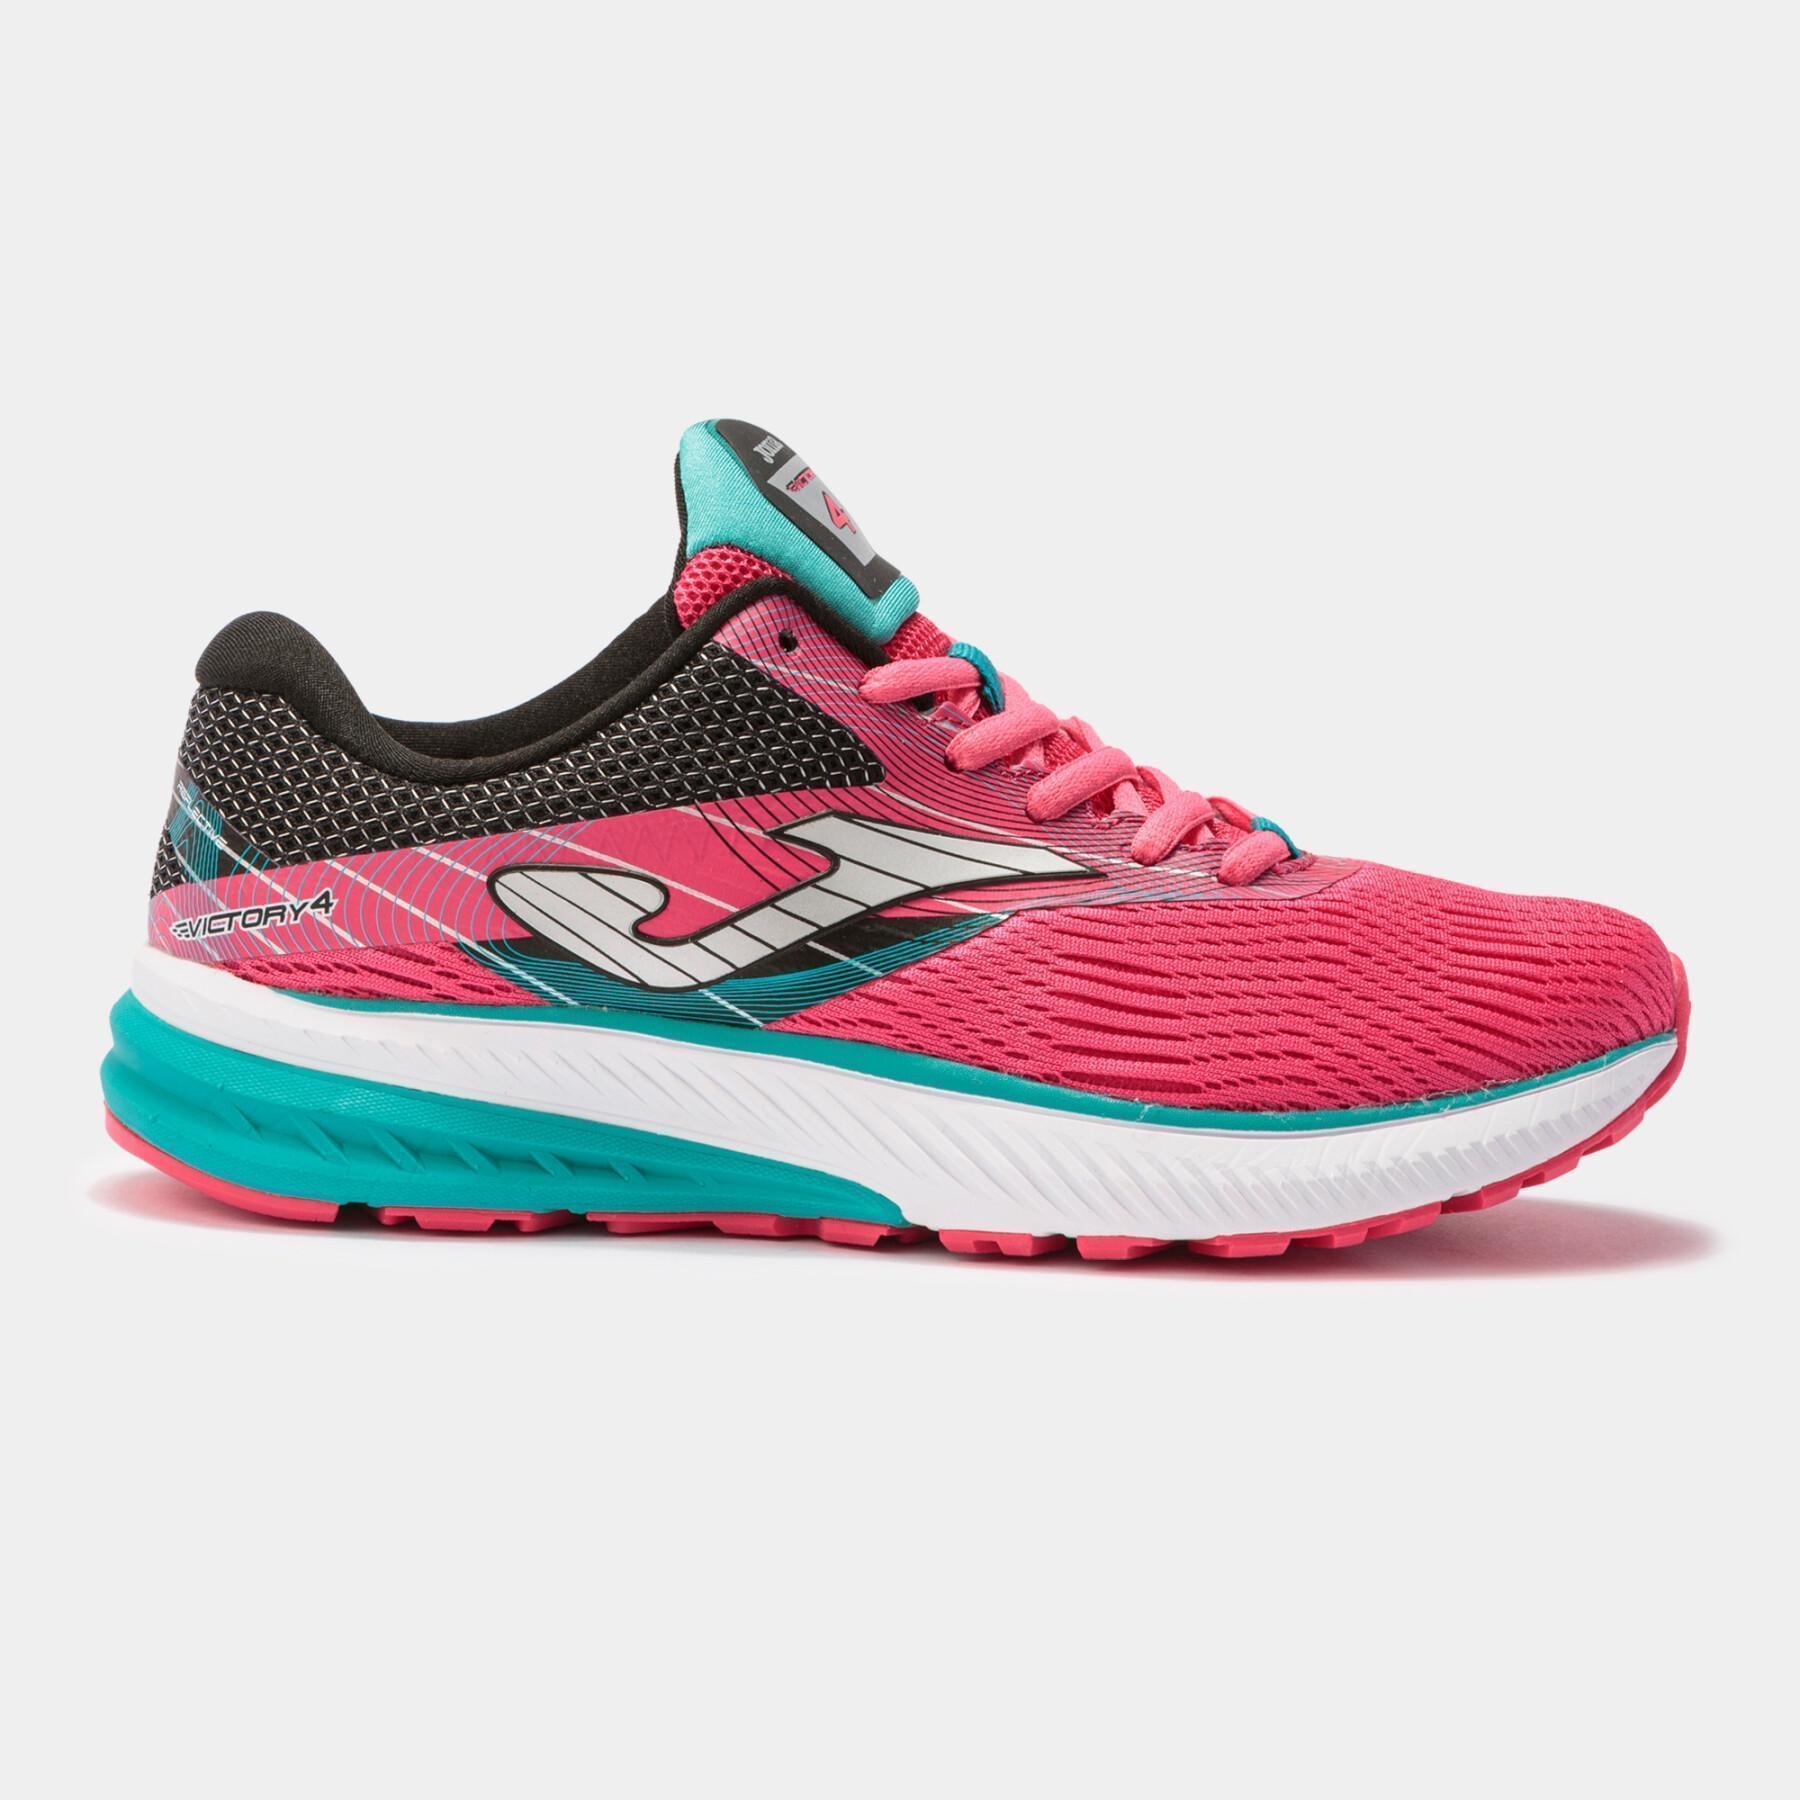 Chaussures de running femme Joma Victory